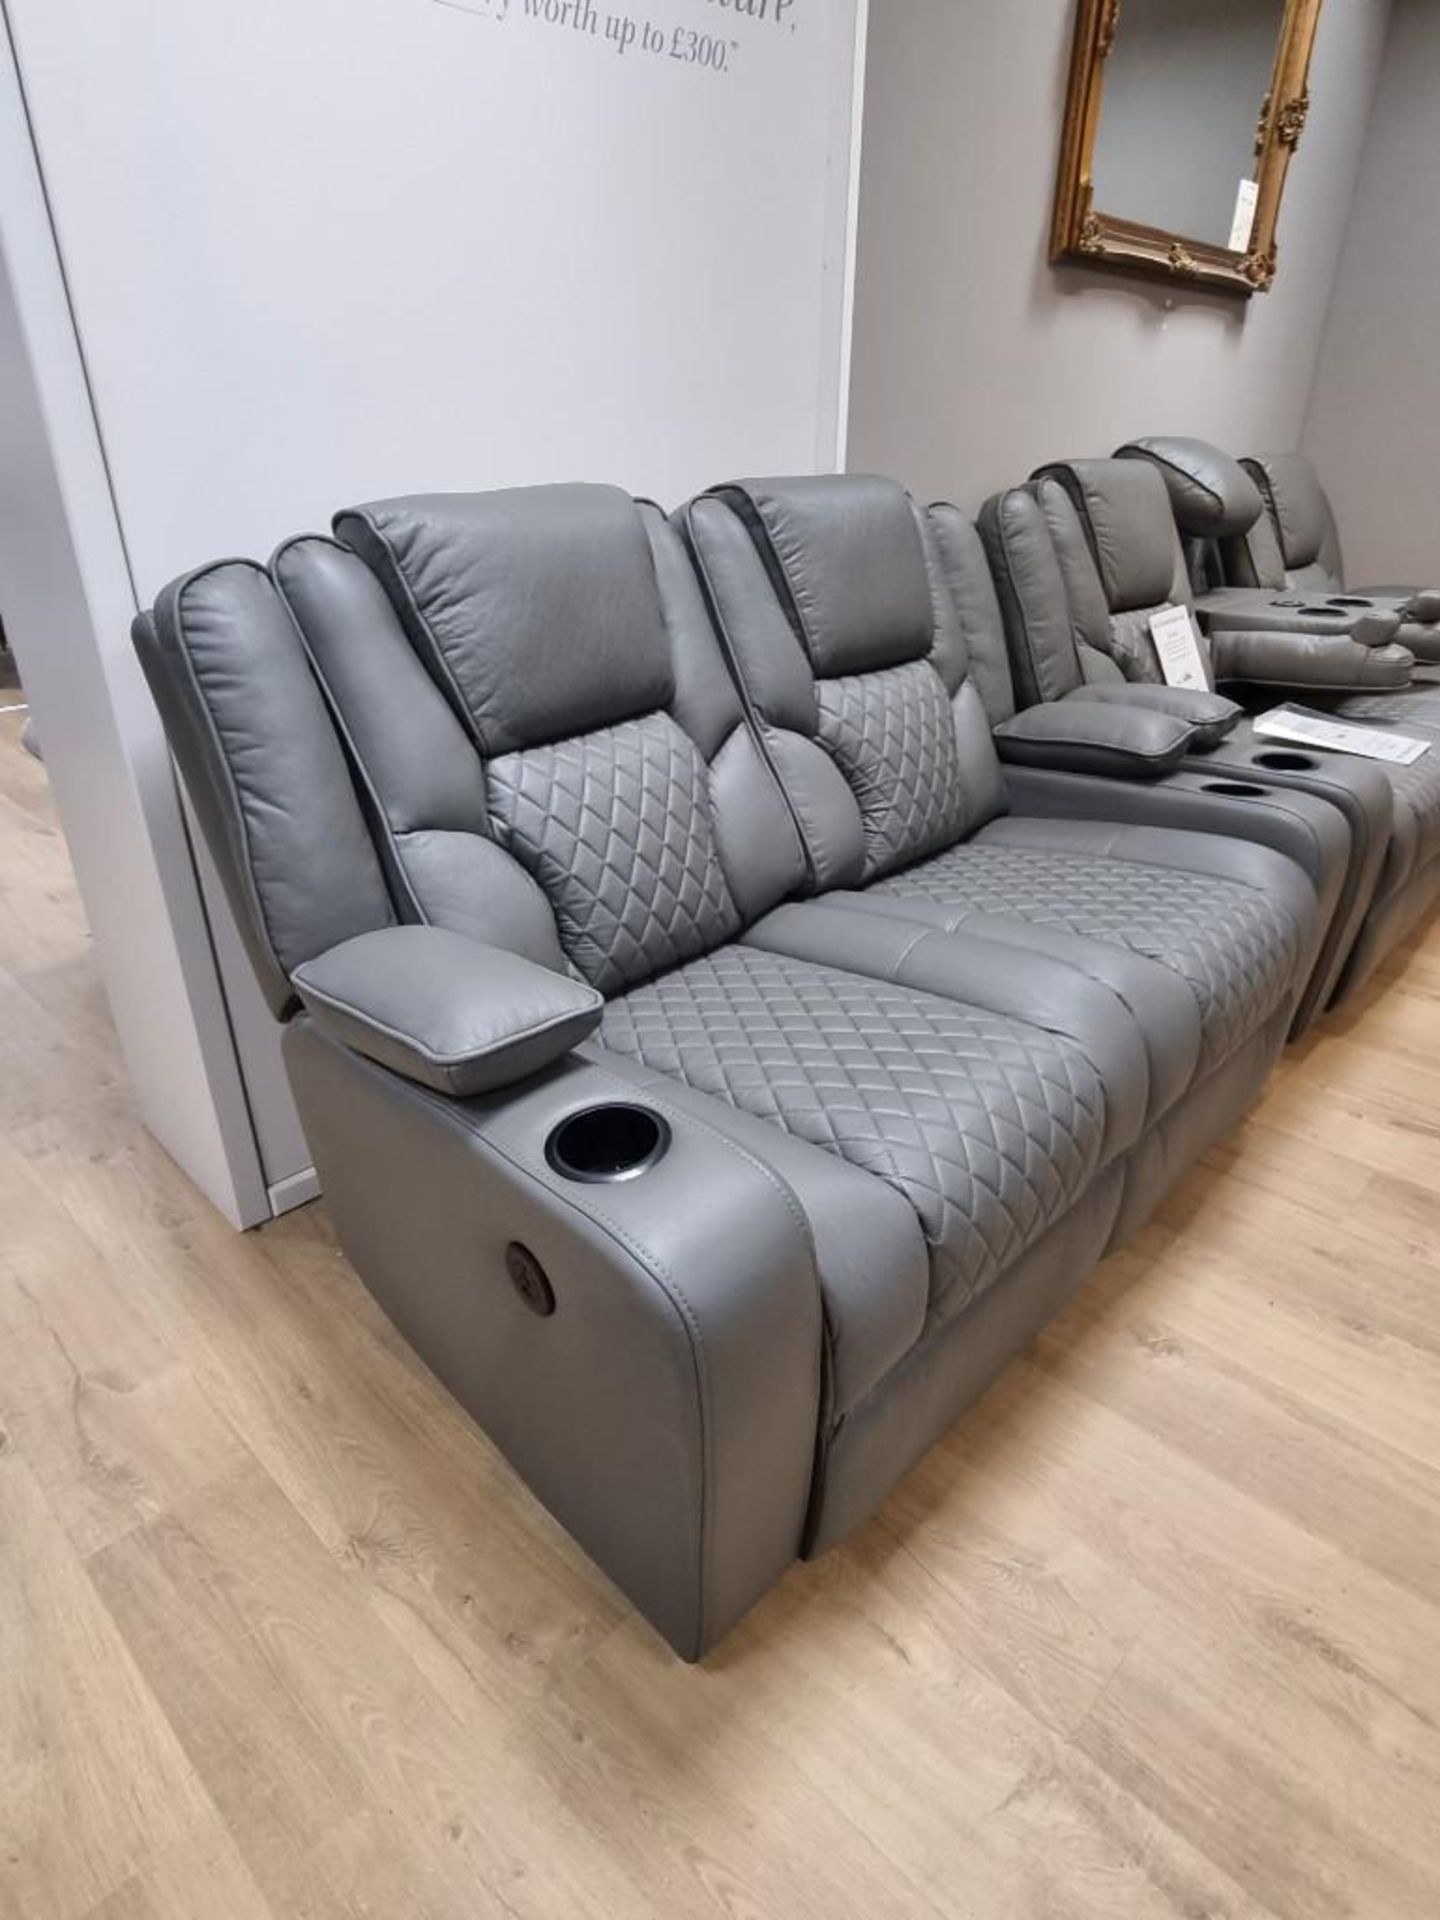 BRAND NEW Grey Leather 2 Seater Electric Recliner With USB Charging Port and Floor lights. - Image 4 of 6